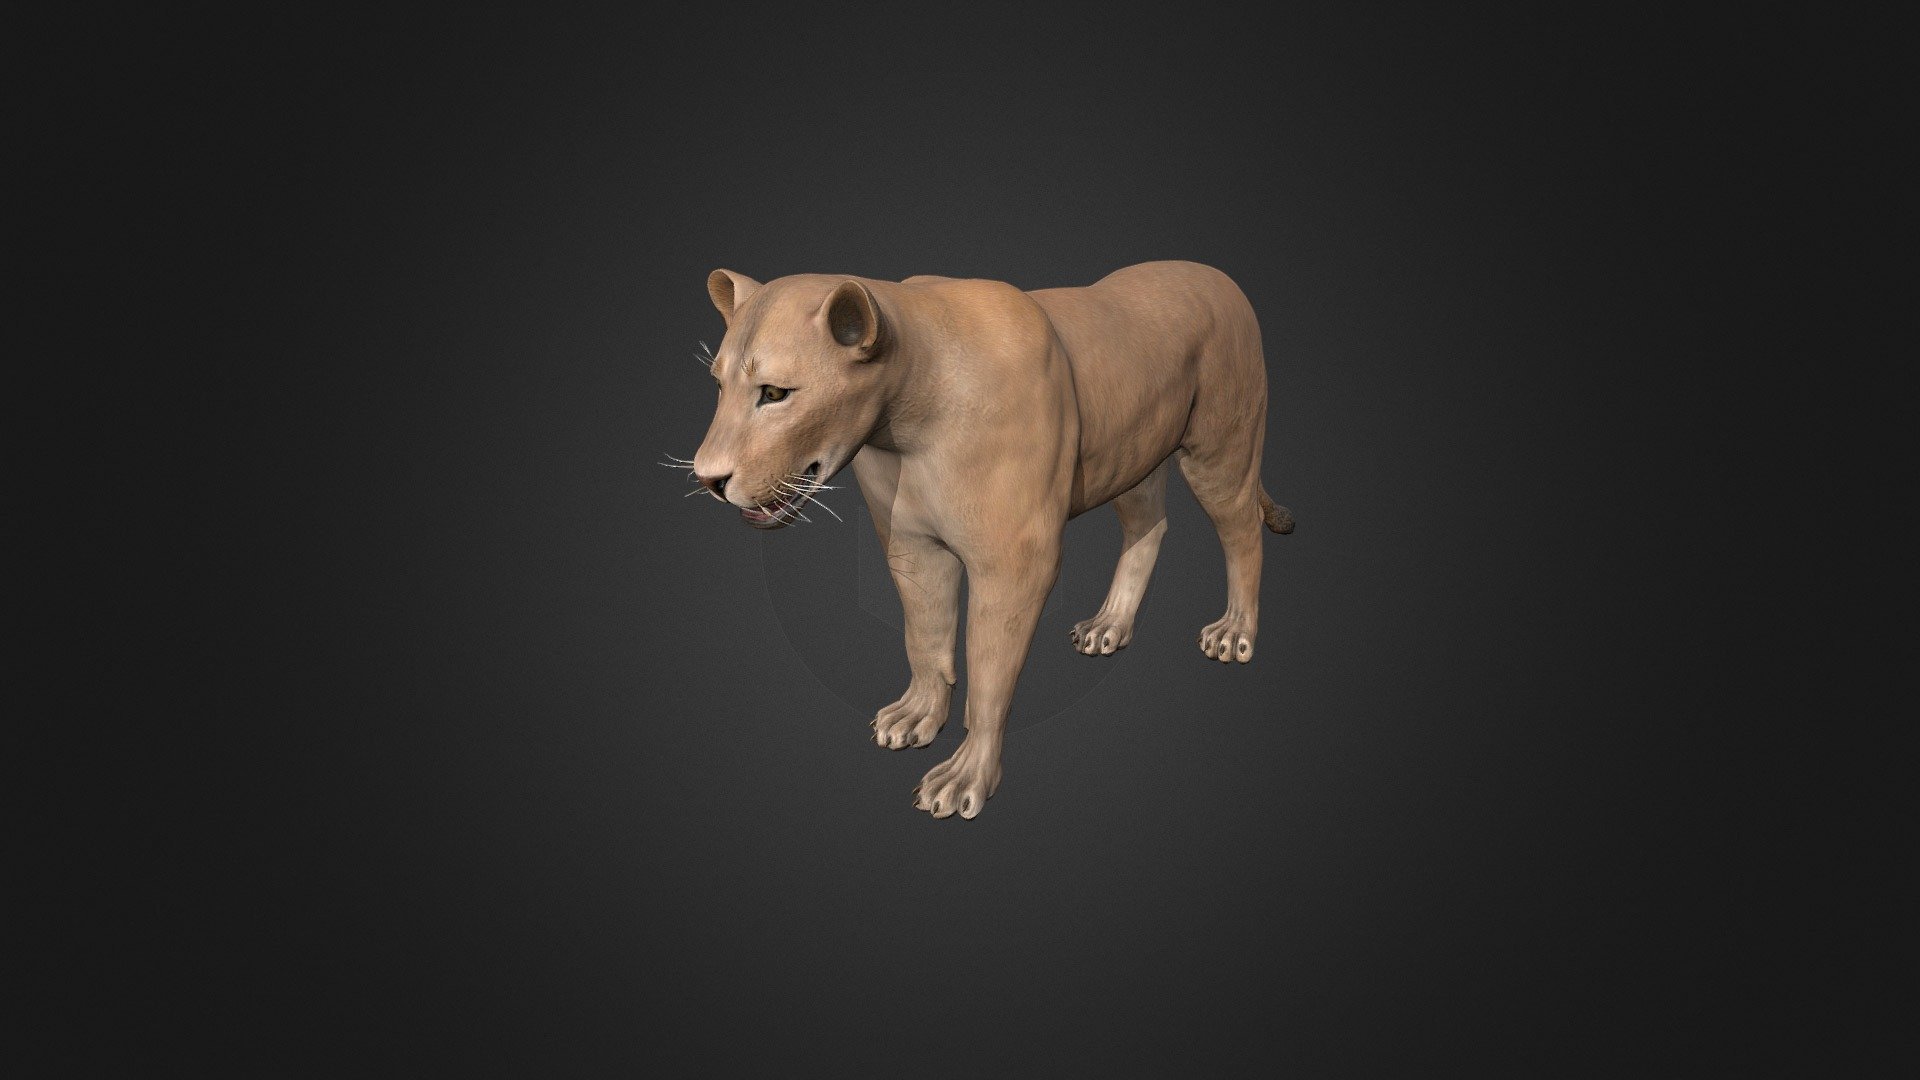 This asset has Lioness model.

Model has 4 LOD.




23800 tris

16850 tris

10000 tris

6150 tris

Diffuse, normal and metallic / roughness maps (all maps 2048x2048).

76 animations (IP/RM)

Attack(1-3), walk (F,FL,FR,B,BL,BR), Run (F,FL,FR), Run_Jump, Trot (F,FL,FR), Swim (F,FL,FR,B,BL,BR), Swim_Idle, Swim_turn(Left/Right), Jump_In_Place, Jump_F, Jump (start/landing), Jump_Loop (up, horisontal, down),Hit (F,M,B) , Lie (Start/end), Lie_Idle 1-3, Sleep (start, idle, end), Idle 1-3, death, eat, turn (left/right) etc.

If you have any questions, please contact us by mail: Chester9292@mail.ru - Lioness - Buy Royalty Free 3D model by Rifat3D 3d model